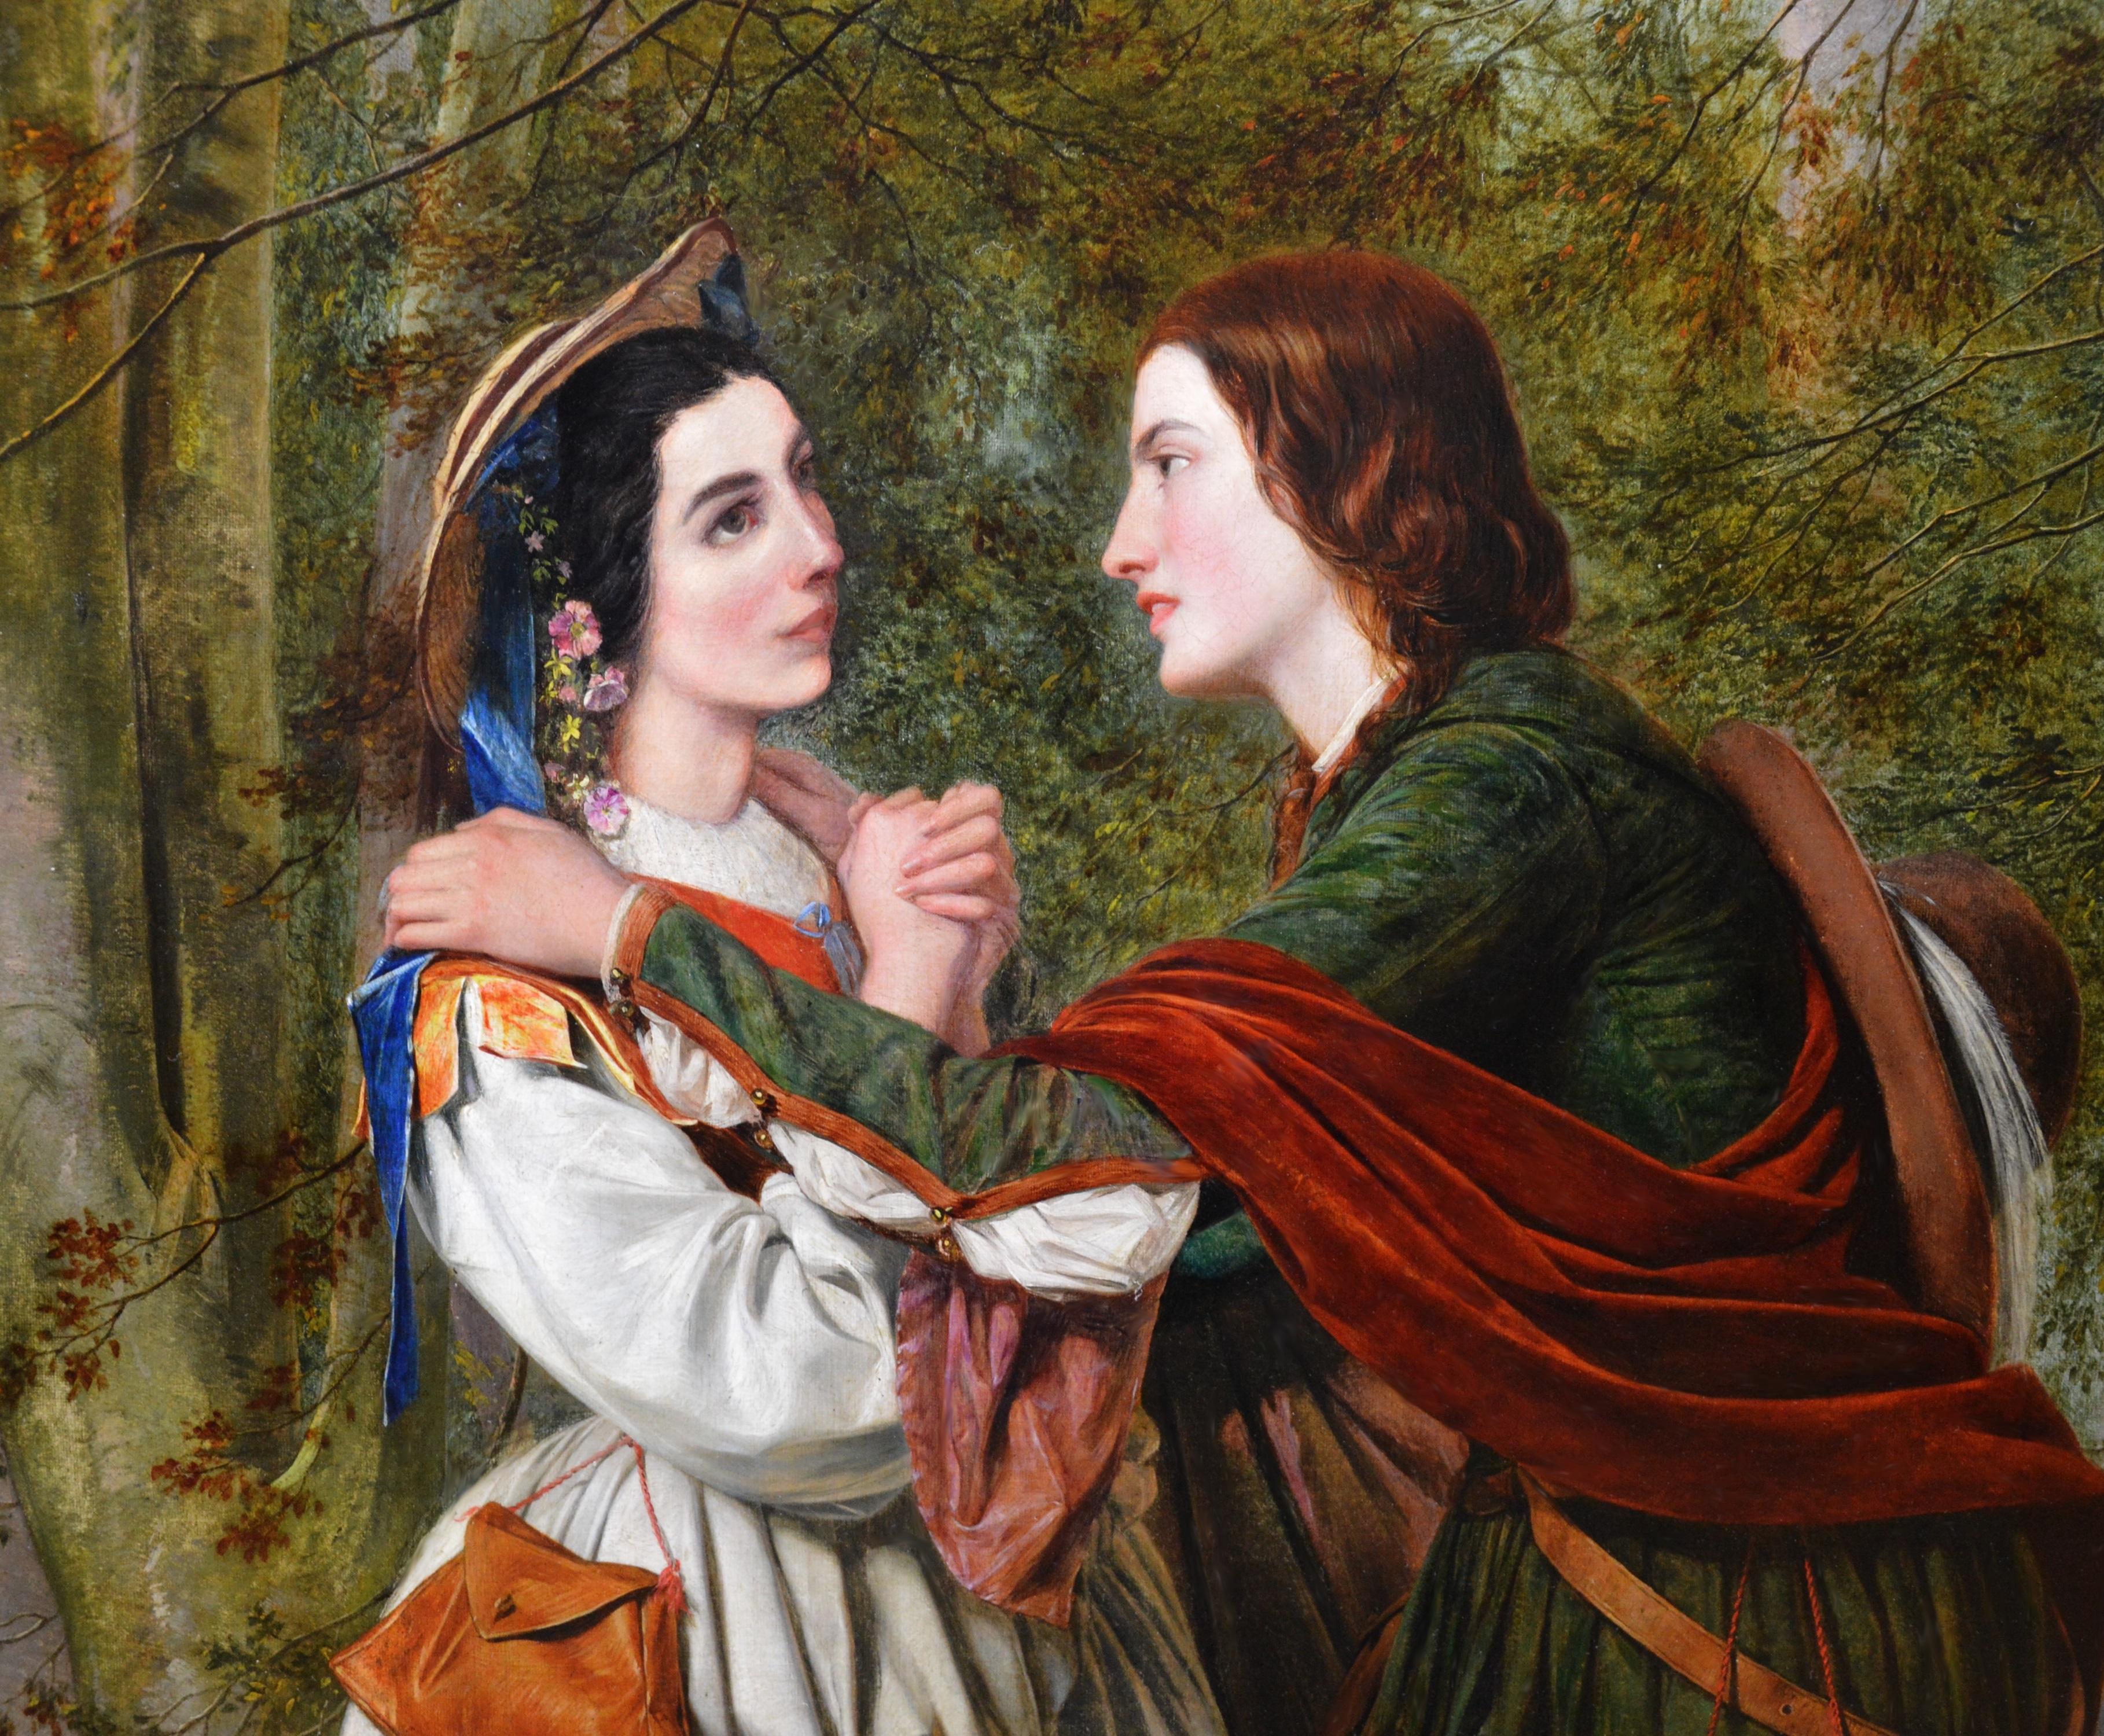 This is a very fine large mid-19th century oil on canvas depicting ‘Rosalind and Celia’ in the Forest of Arden from Act 3, Scene 2 of William Shakespeare’s ‘As You Like It’ by the famous English Victorian artist Henry Nelson O’Neil ARA (1817-1880).